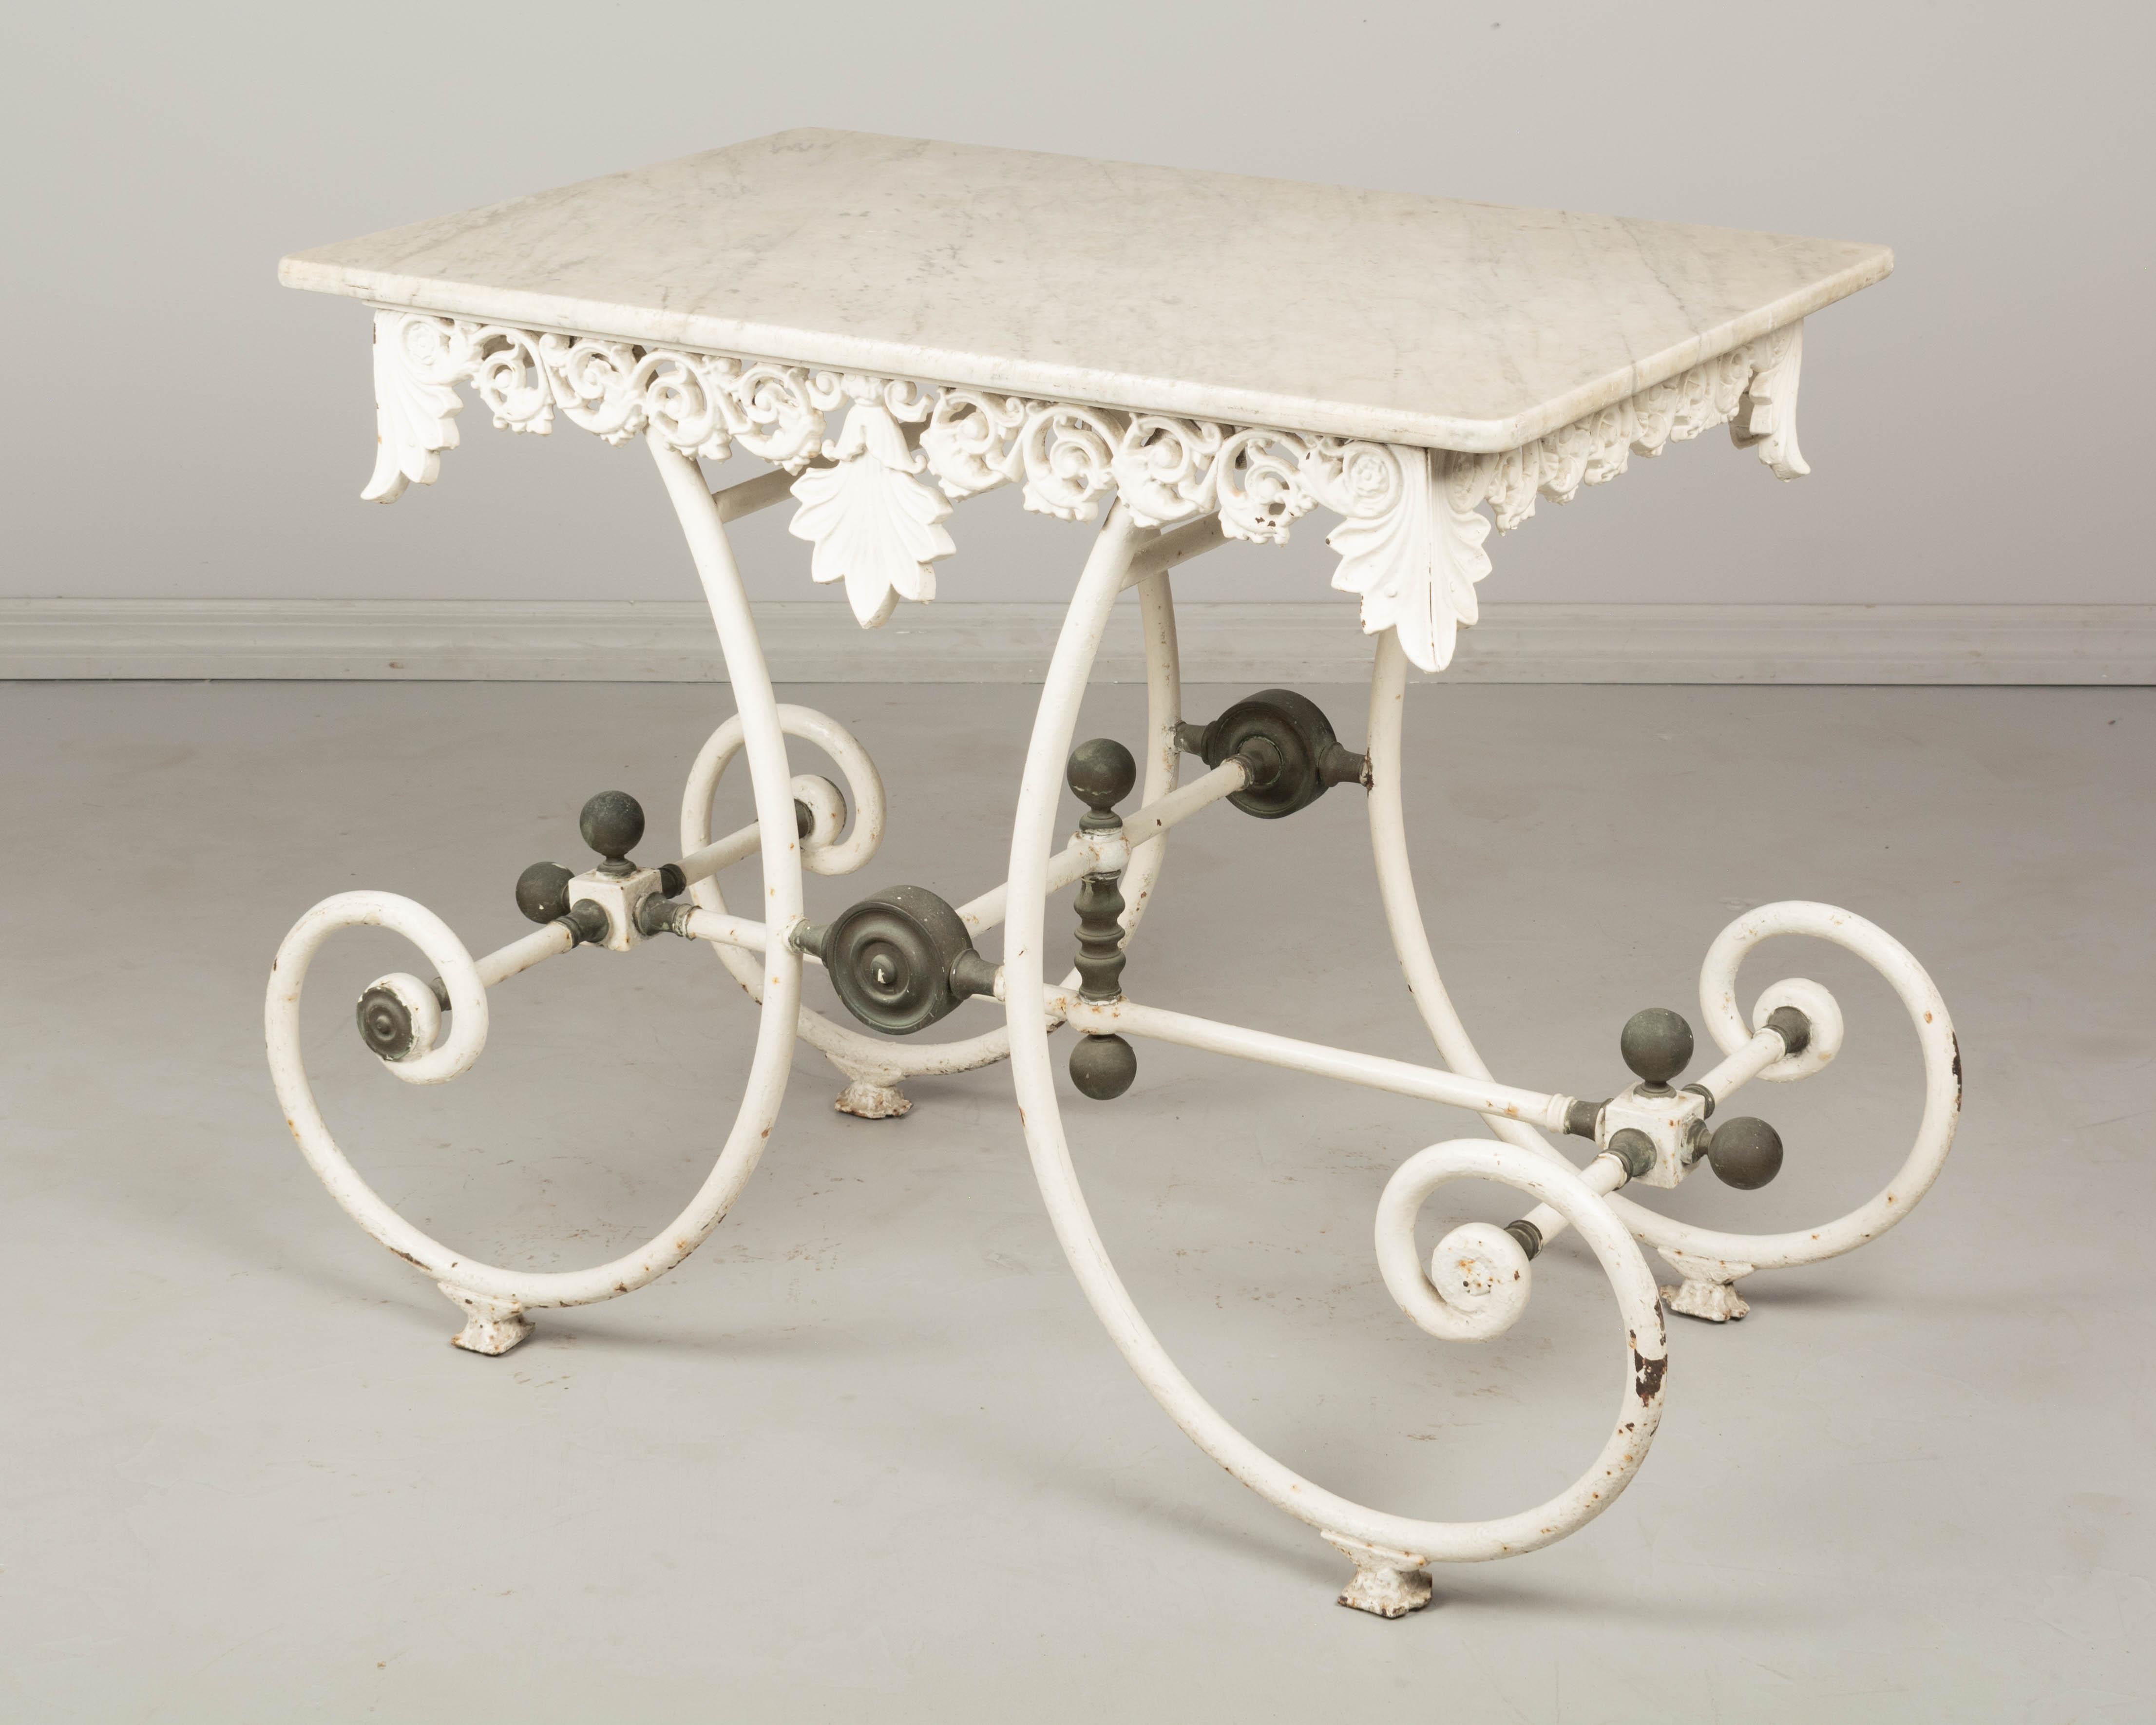 A 19th century French marble top pastry table with old white painted patina. Curved wrought iron base. Decorative brass hardware with grey patina. Ornate cast iron frieze around the perimeter with large acanthus leaves. White veined marble top.